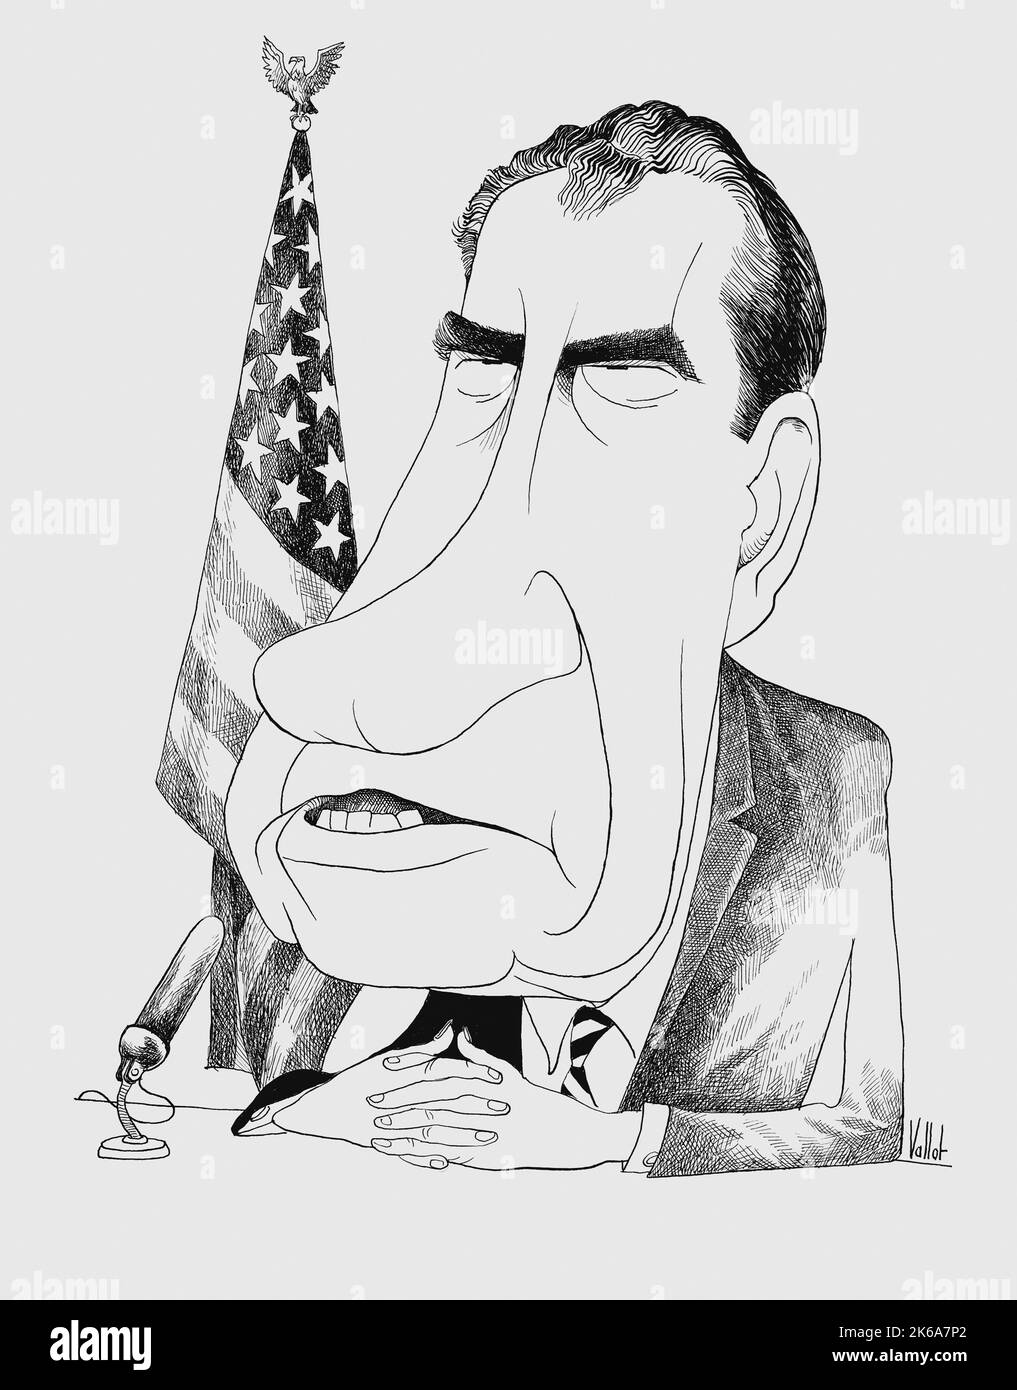 A caricature of President Richard Nixon seated before a microphone in front of an American flag. Stock Photo